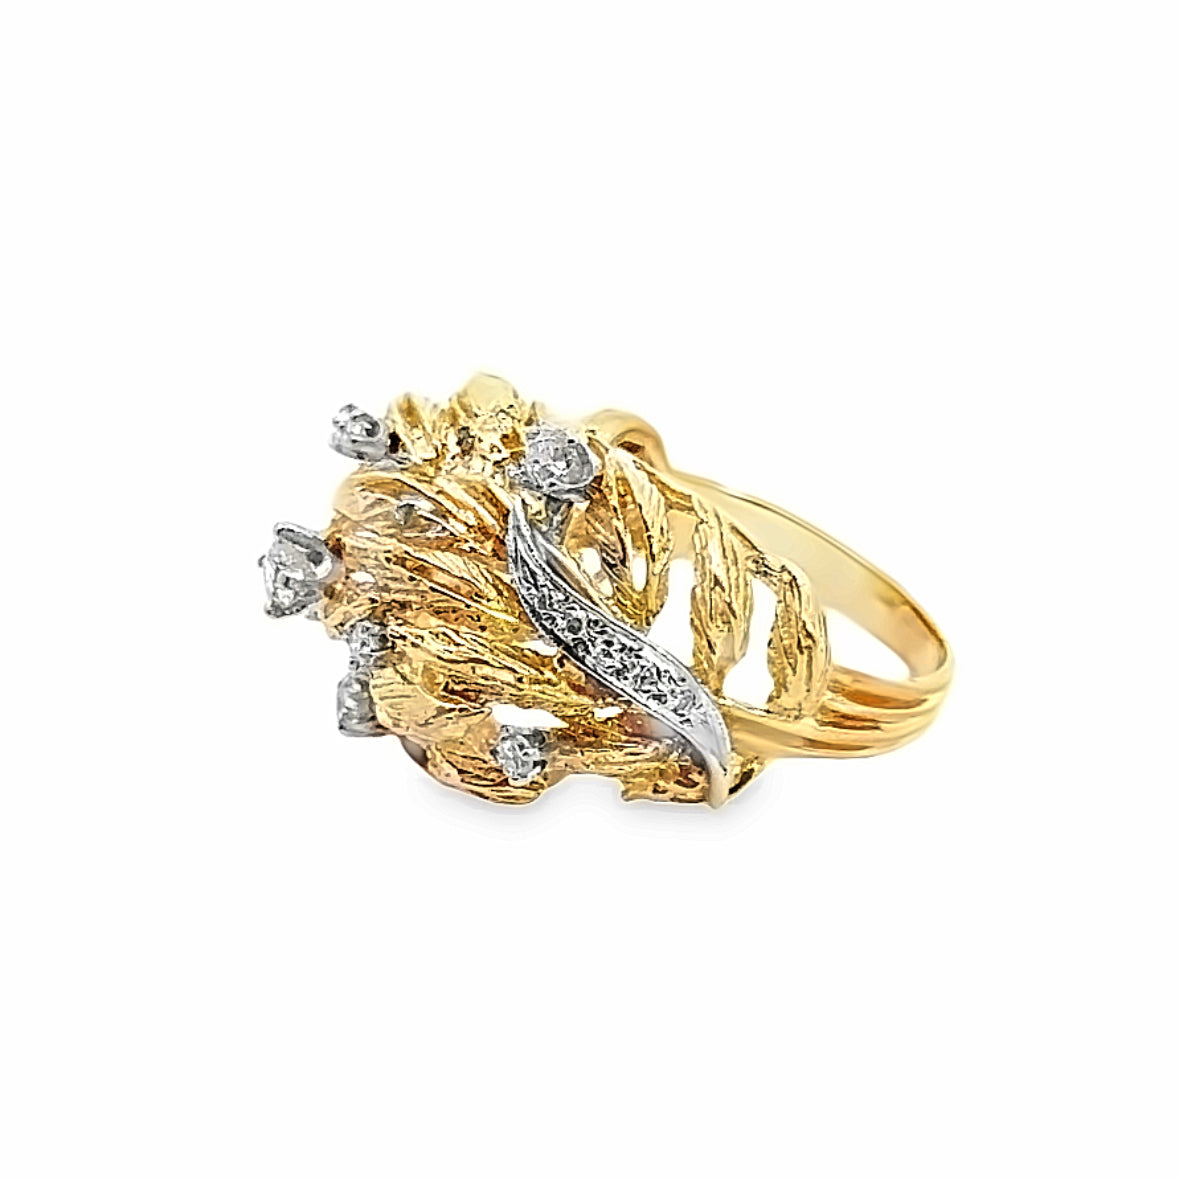 14K Yellow & White Gold Leaf Branch Design with Brilliant Cut Diamond Accents